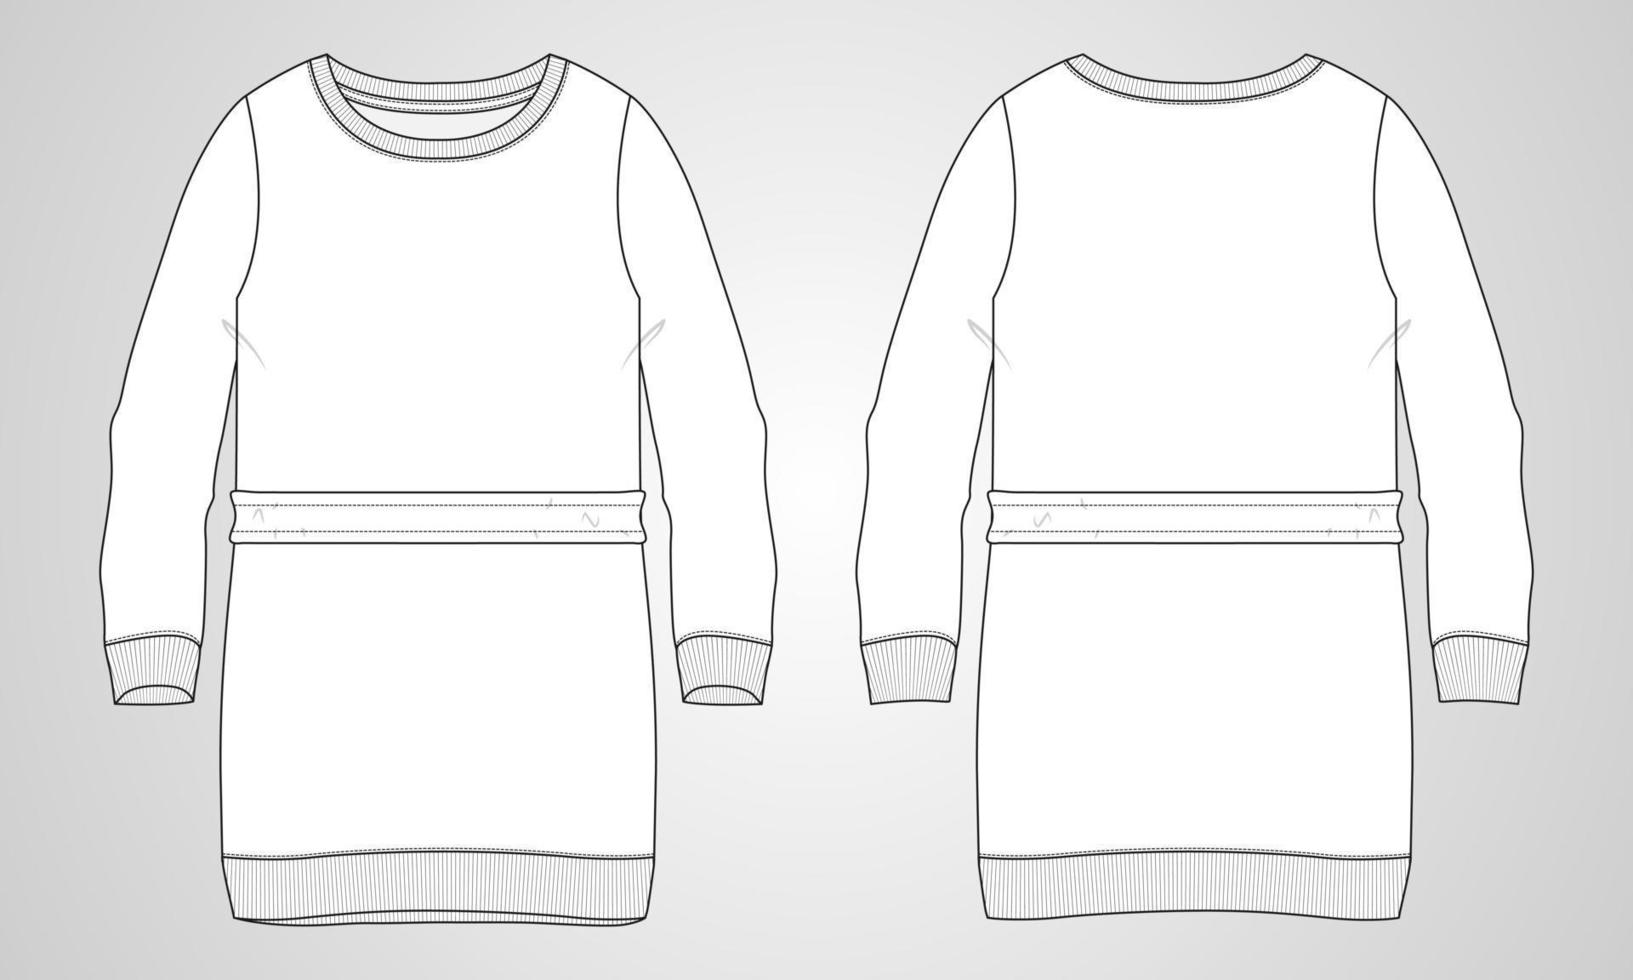 Women's long Oversize Cotton fleece jersey Sweater technical Flat sketch vector illustration template. Apparel sweater Mock up front and back views